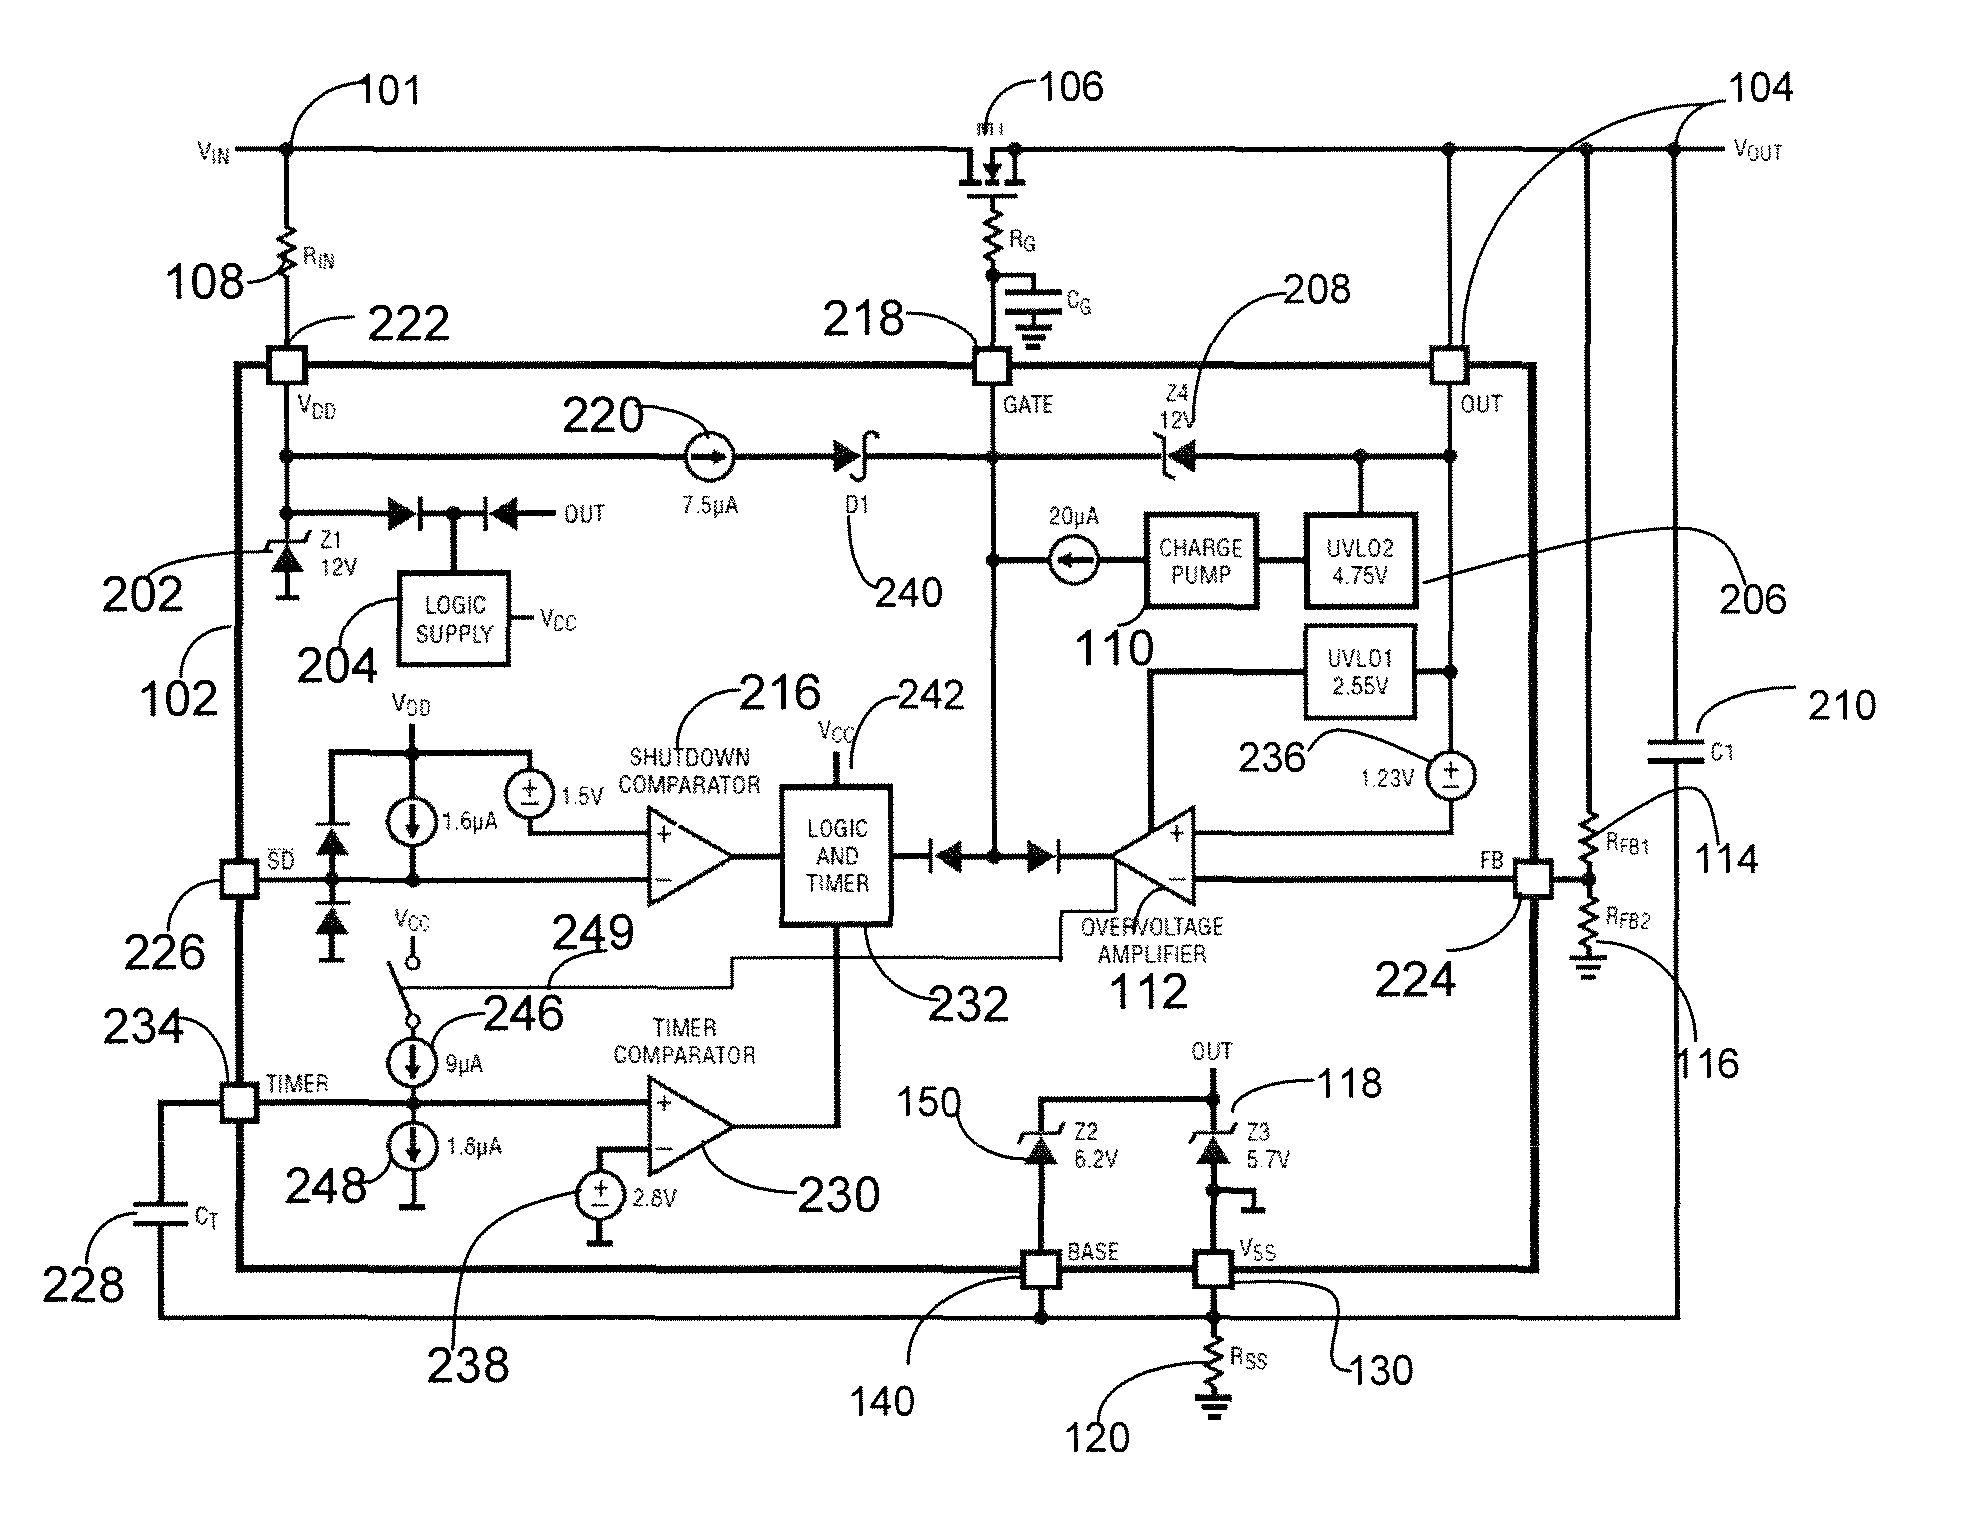 Circuitry to prevent overvoltage of circuit systems